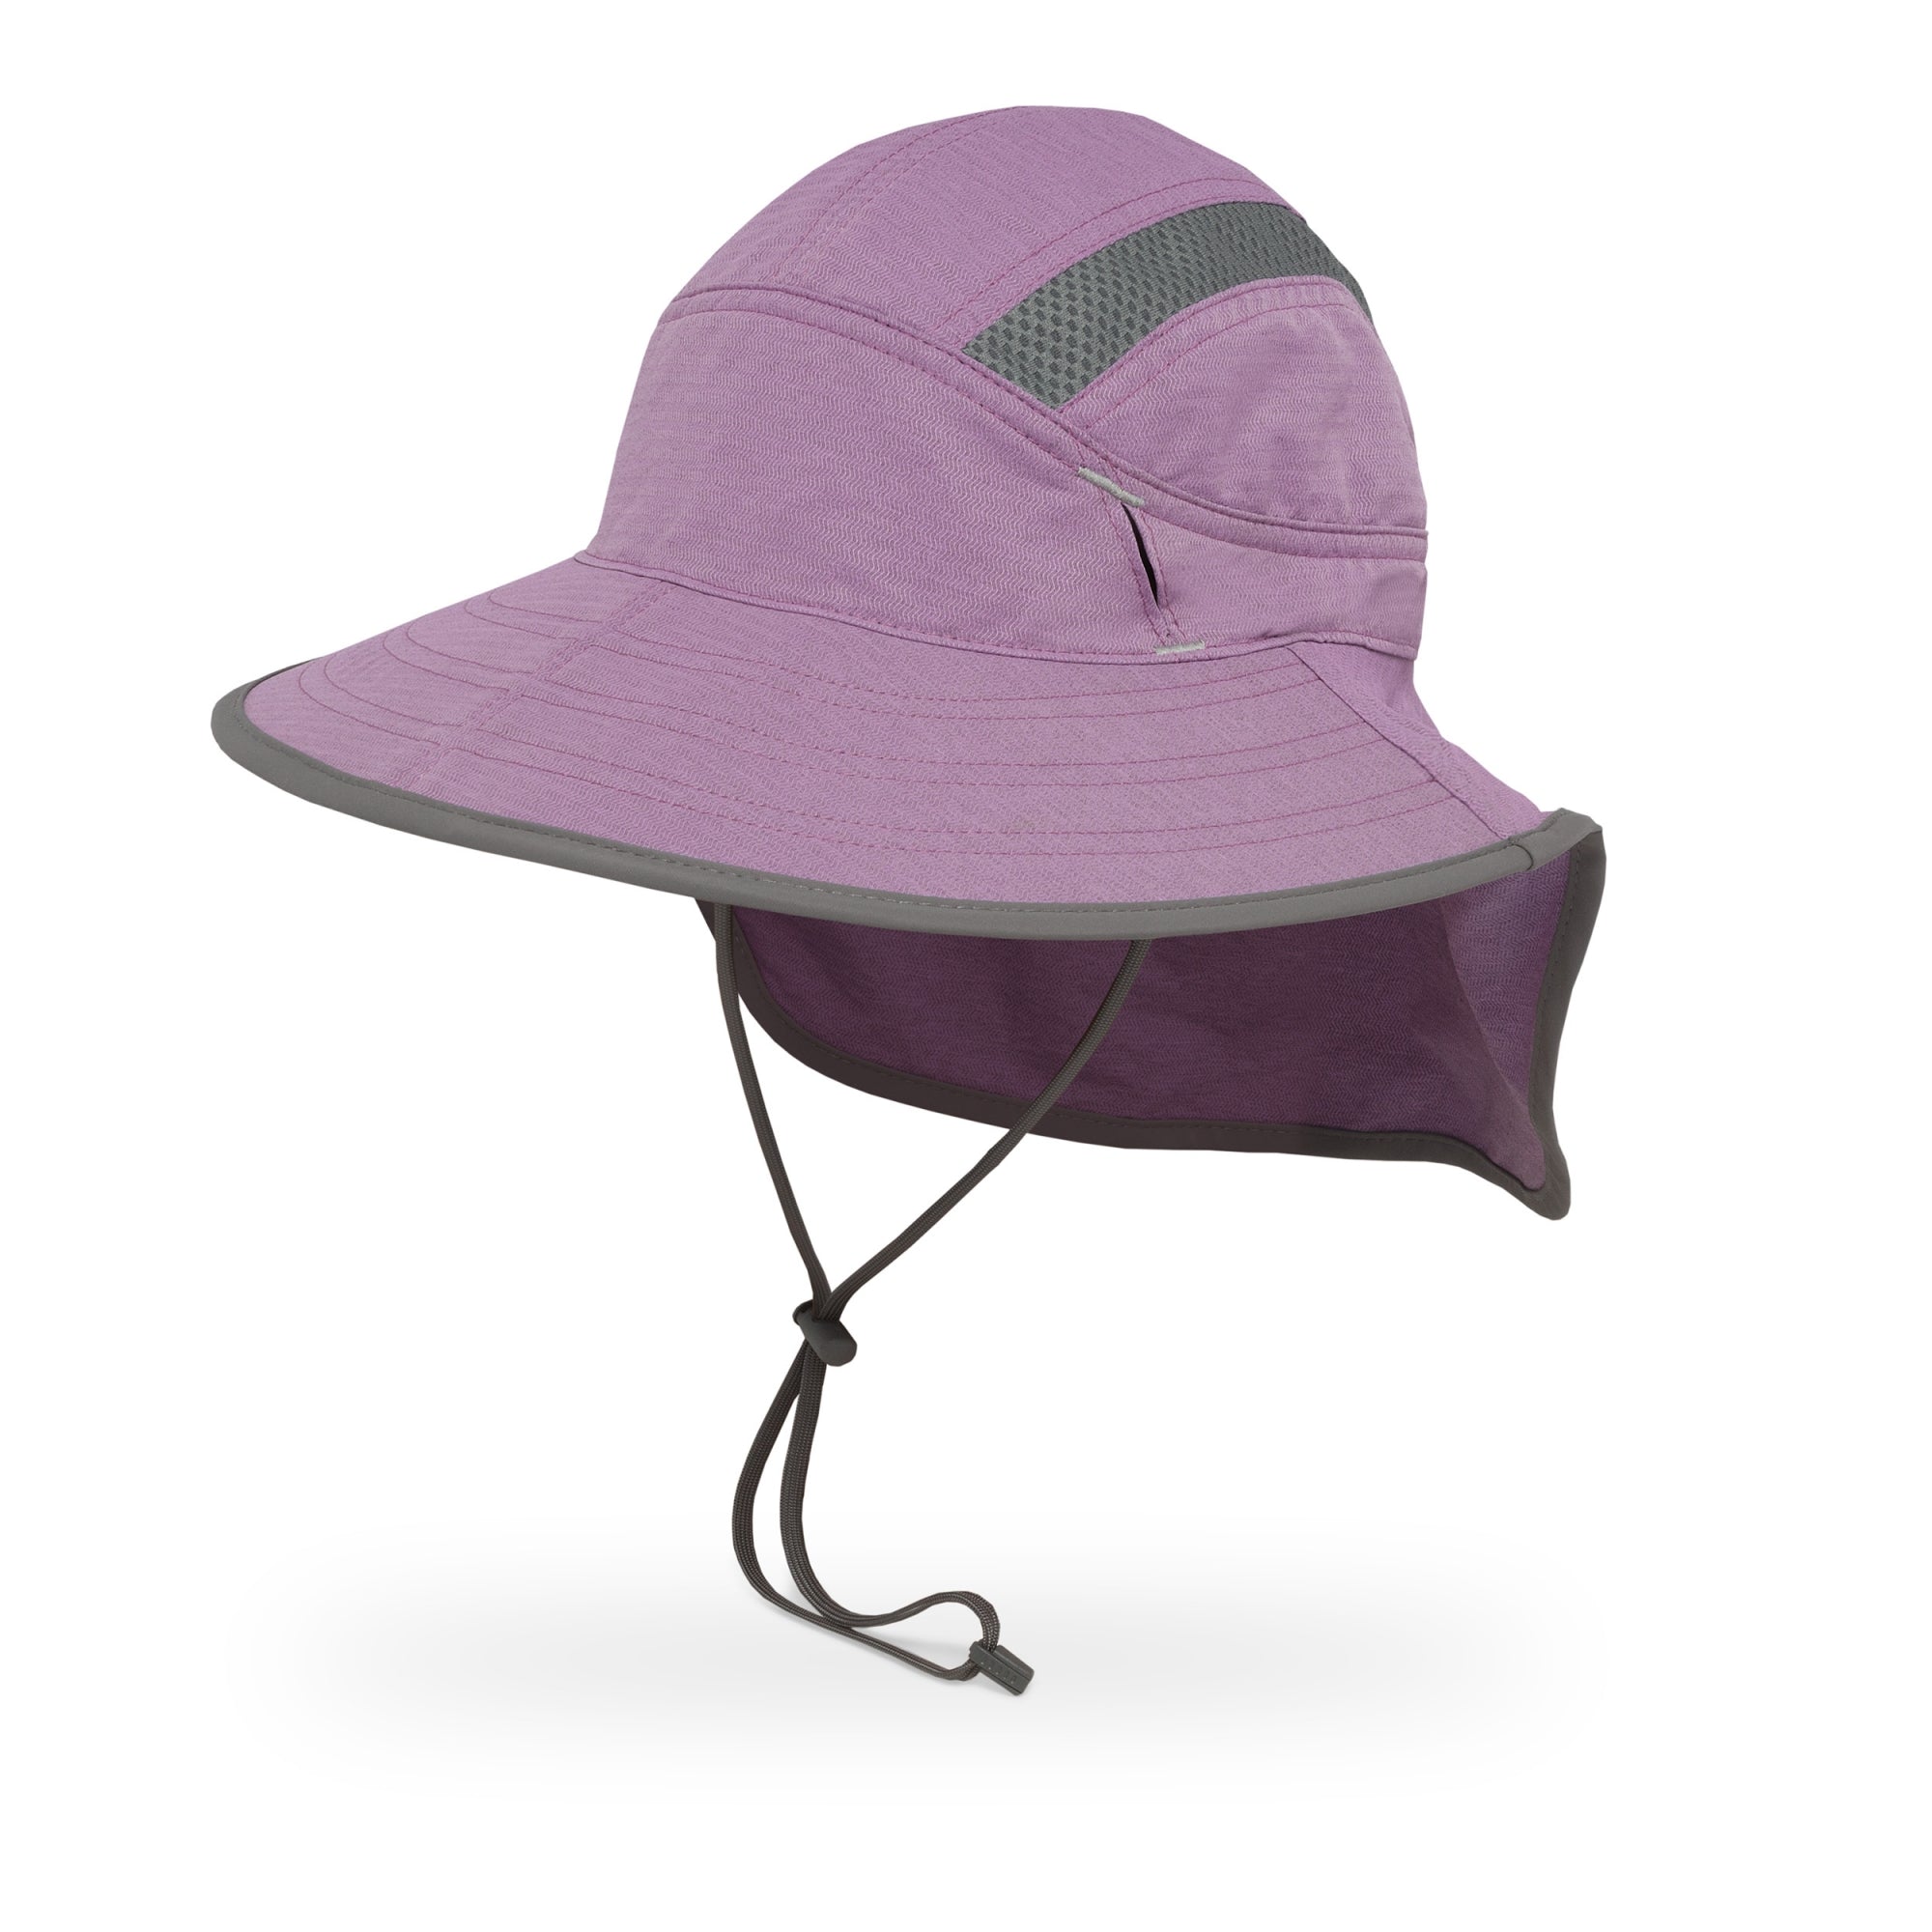 Sunday Afternoons Ultra Adventure Hat (CINDER/GRAY, S/M)